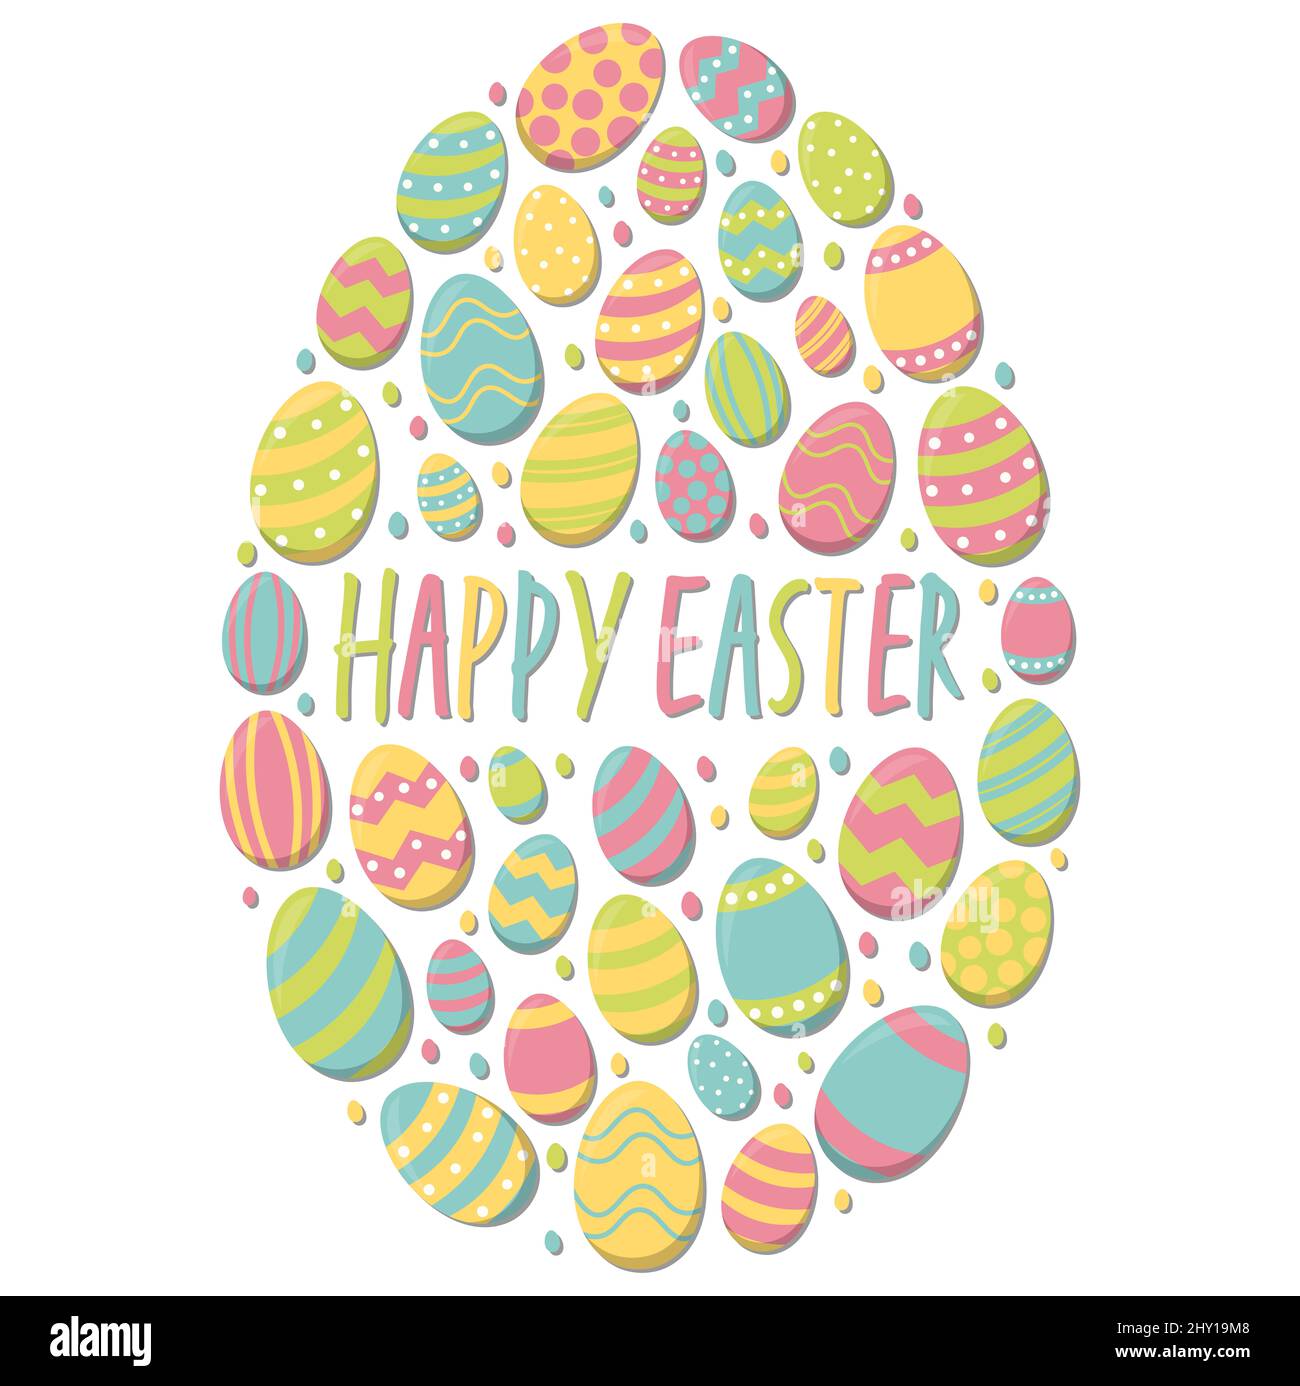 eps vector illustration of painted easter eggs with different colors combined to form a large egg and easter time greetings on white background Stock Photo